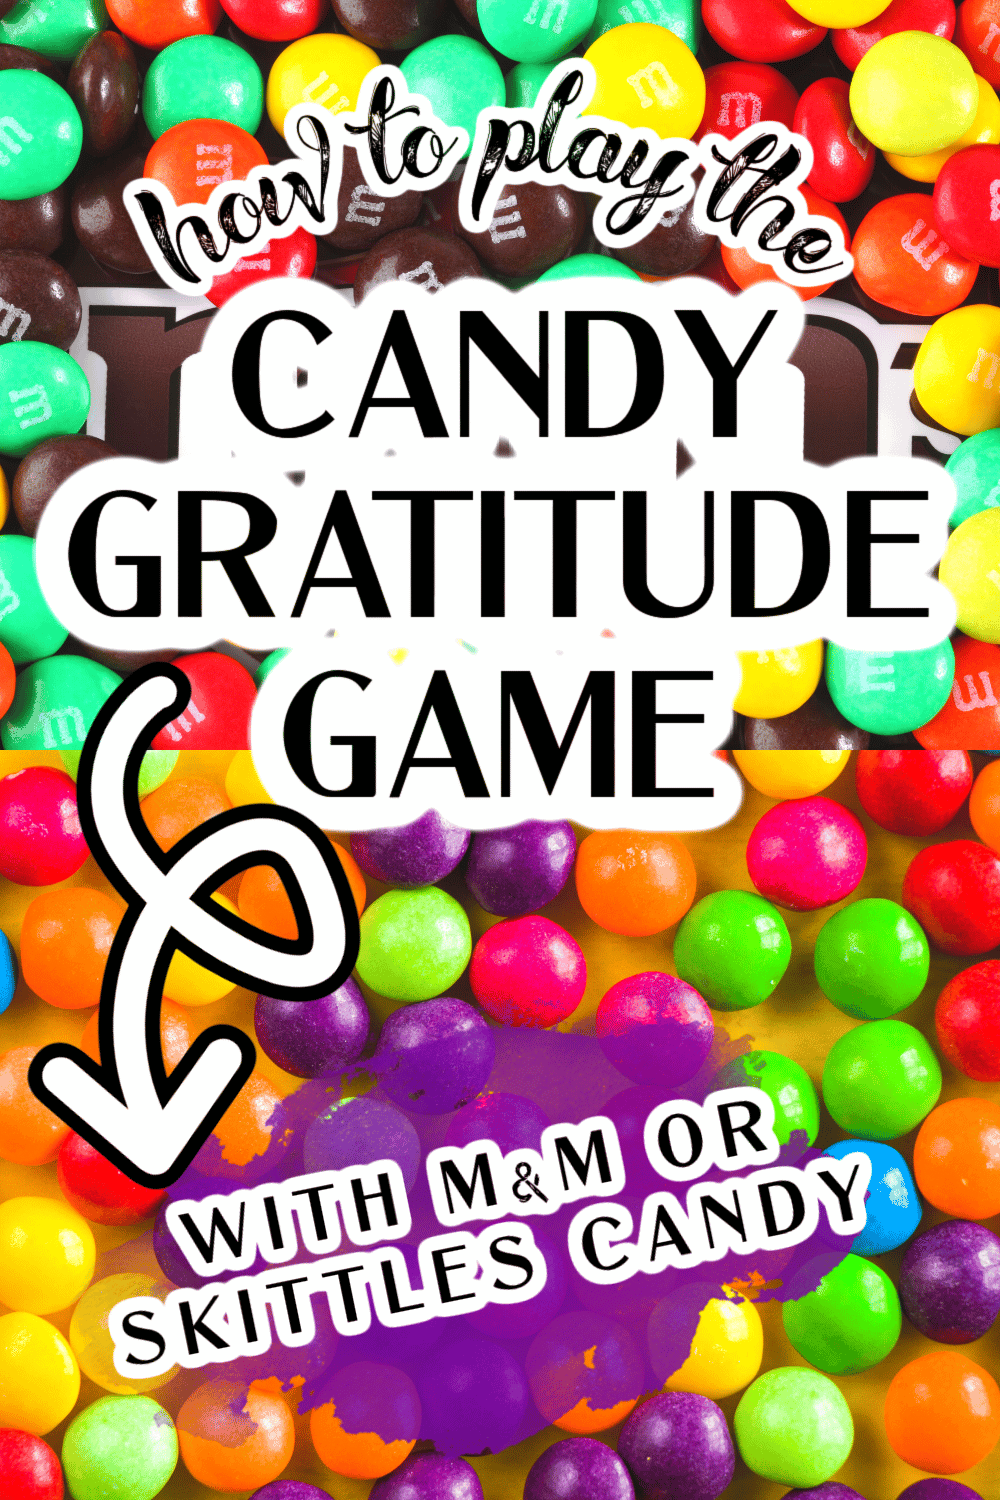 How To Play The Candy Gratitude Game (M&M Gratitude Game and Skittle Gratitude Game)